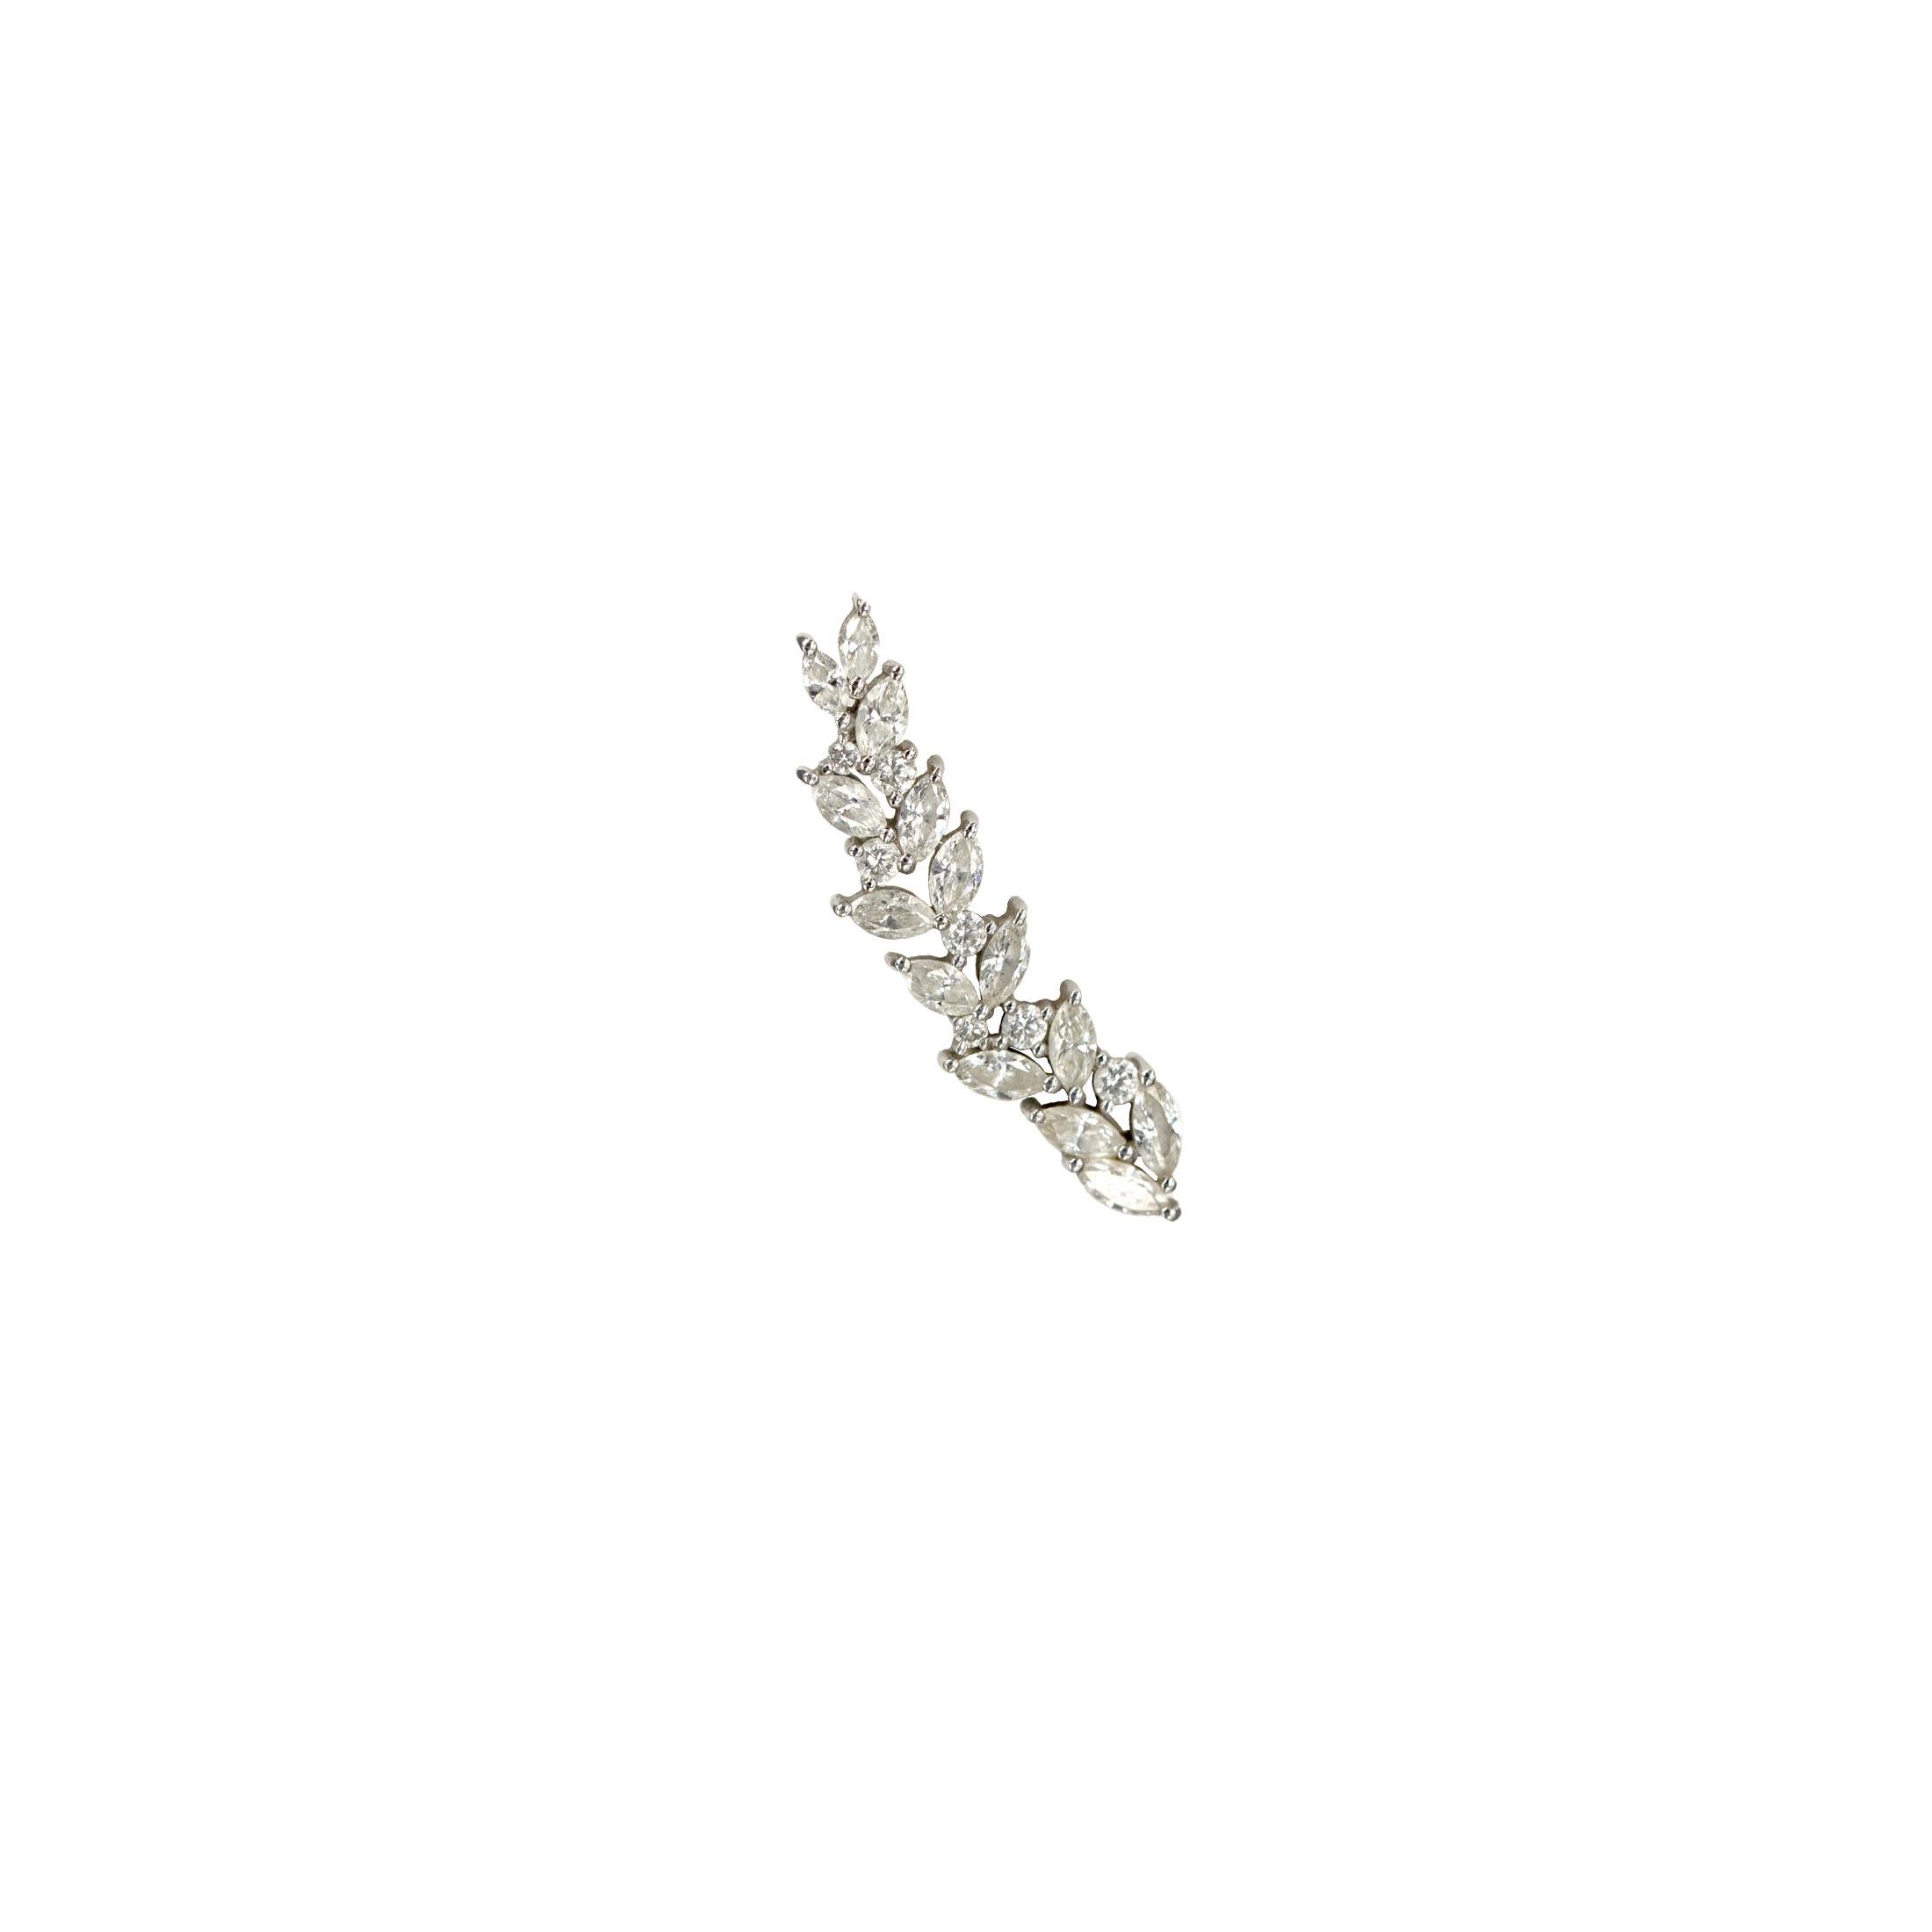 18 karat white gold crawler stud earring with special prolong back
set with marquise and round diamonds of total weight 1.26 carat. 
Gold weight is 2.8 gm. Please note that it is sold as single earring for right ear. You can order a matching earring